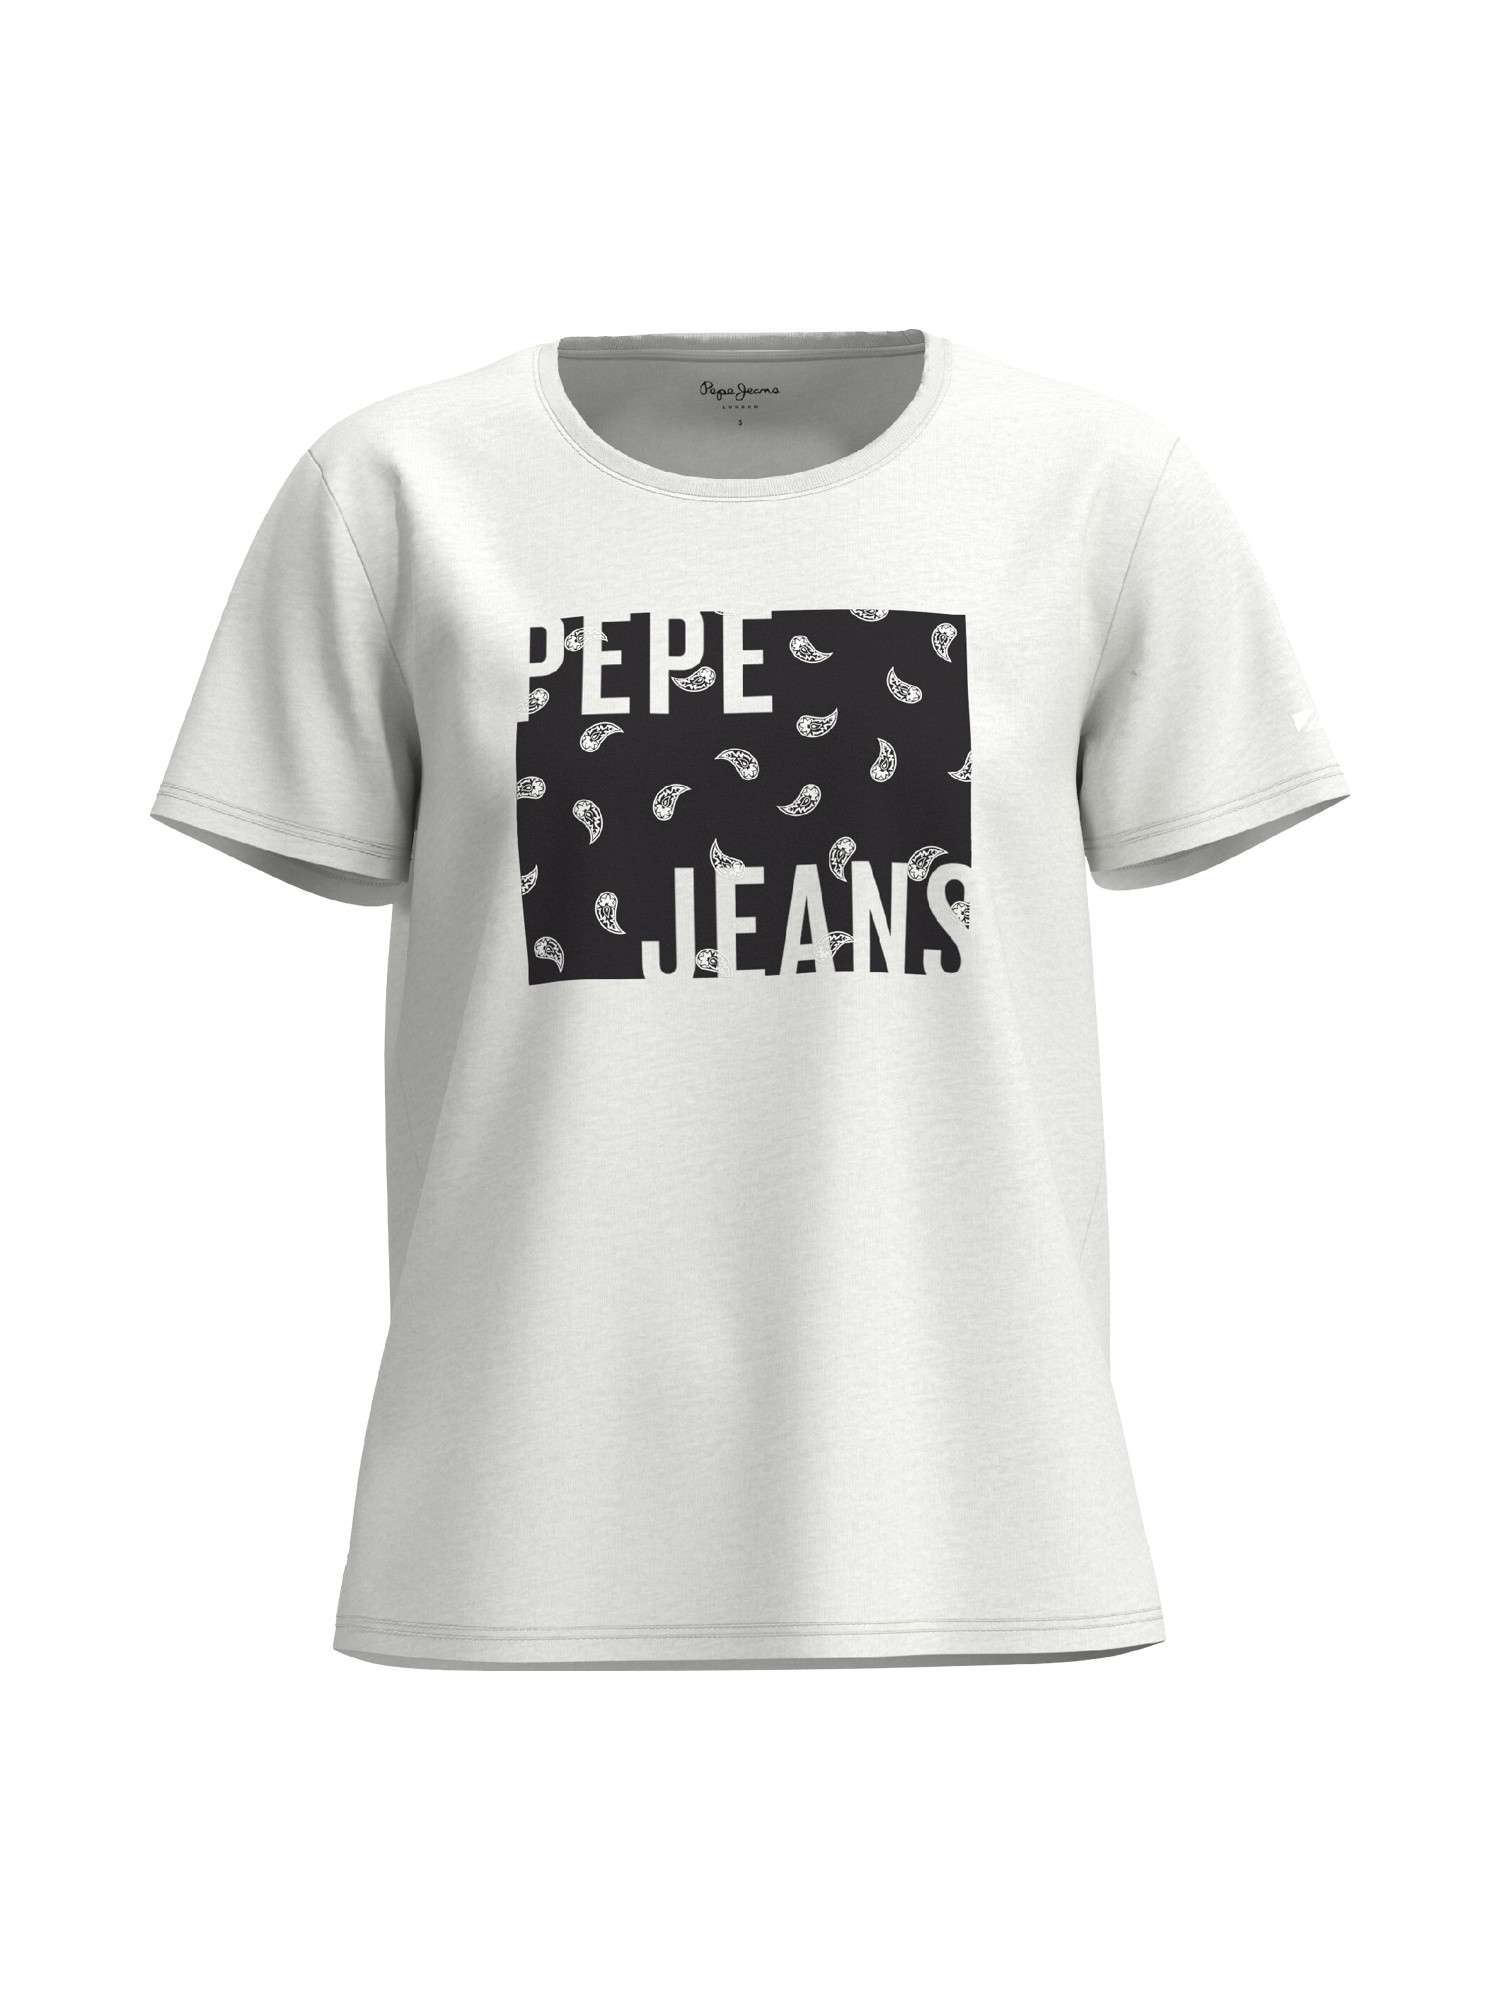 Pepe jeans - T-shirt with print, White, large image number 0